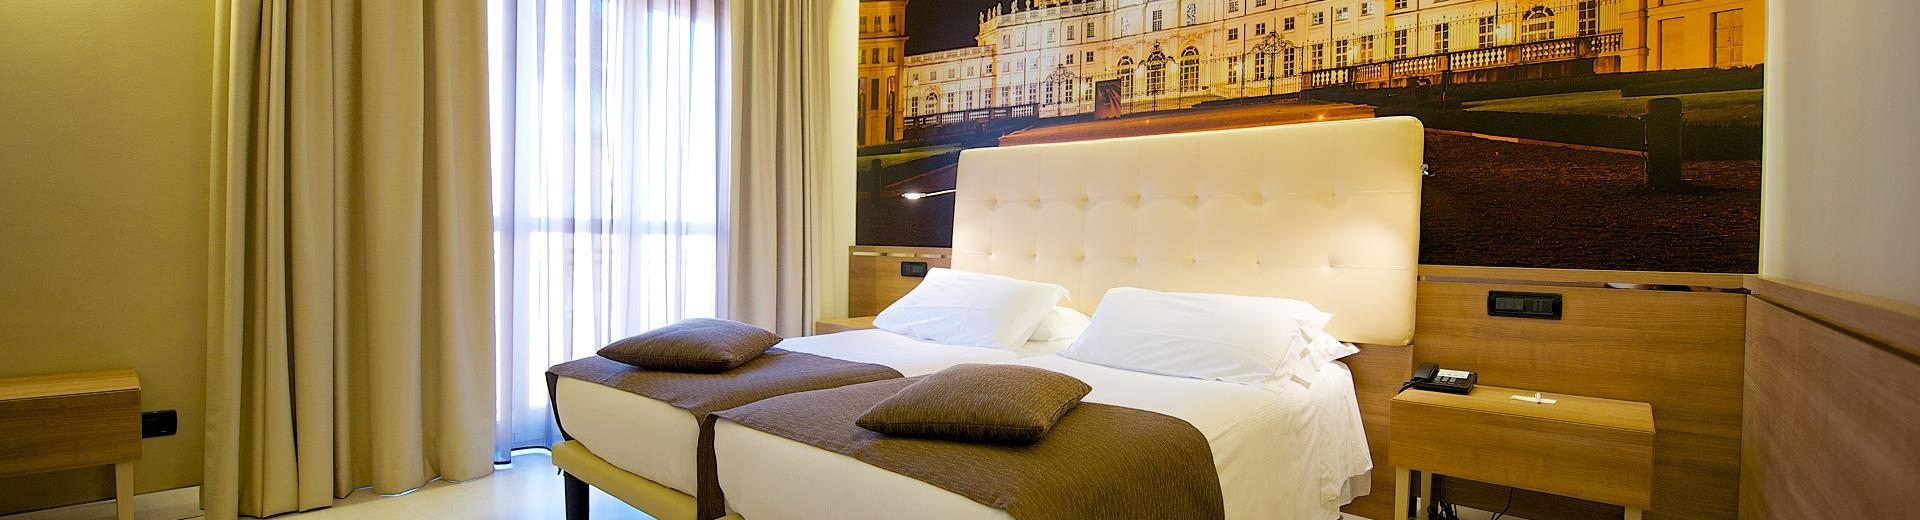 Enjoy the comfort of a 4-star stay in a Deluxe room: choose hotel Luxor for your stay in Turin!